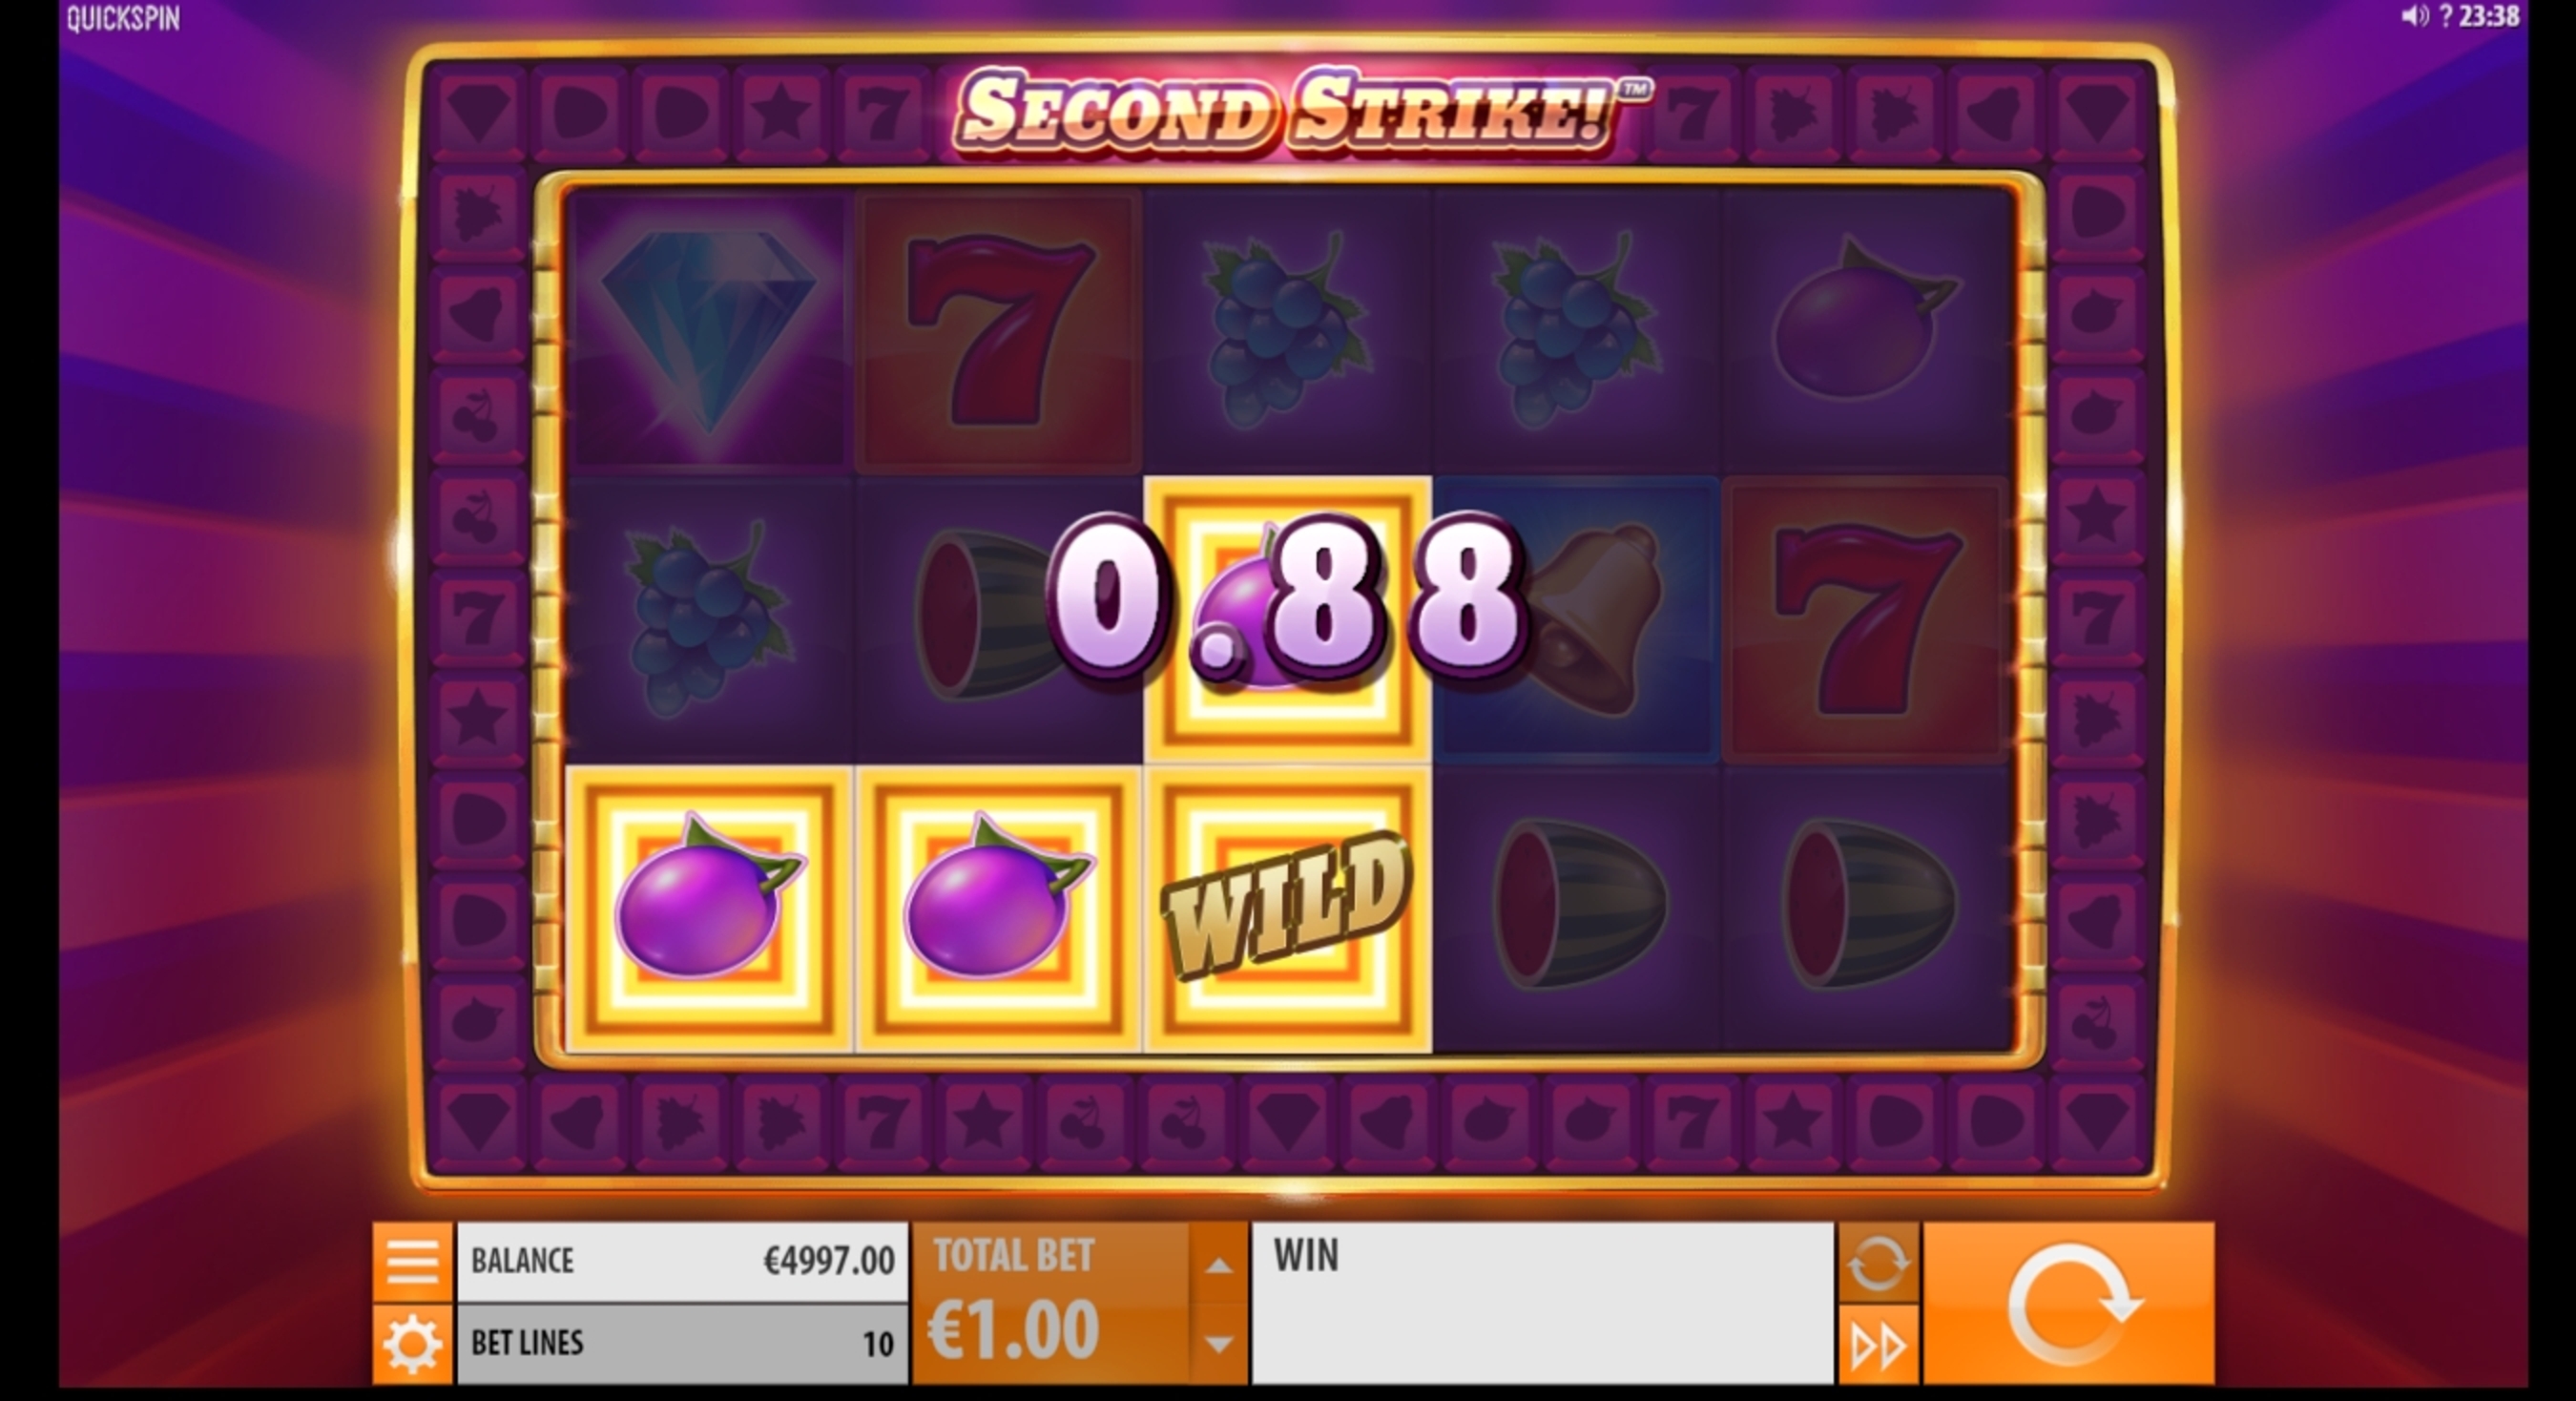 Win Money in Second Strike Free Slot Game by Quickspin